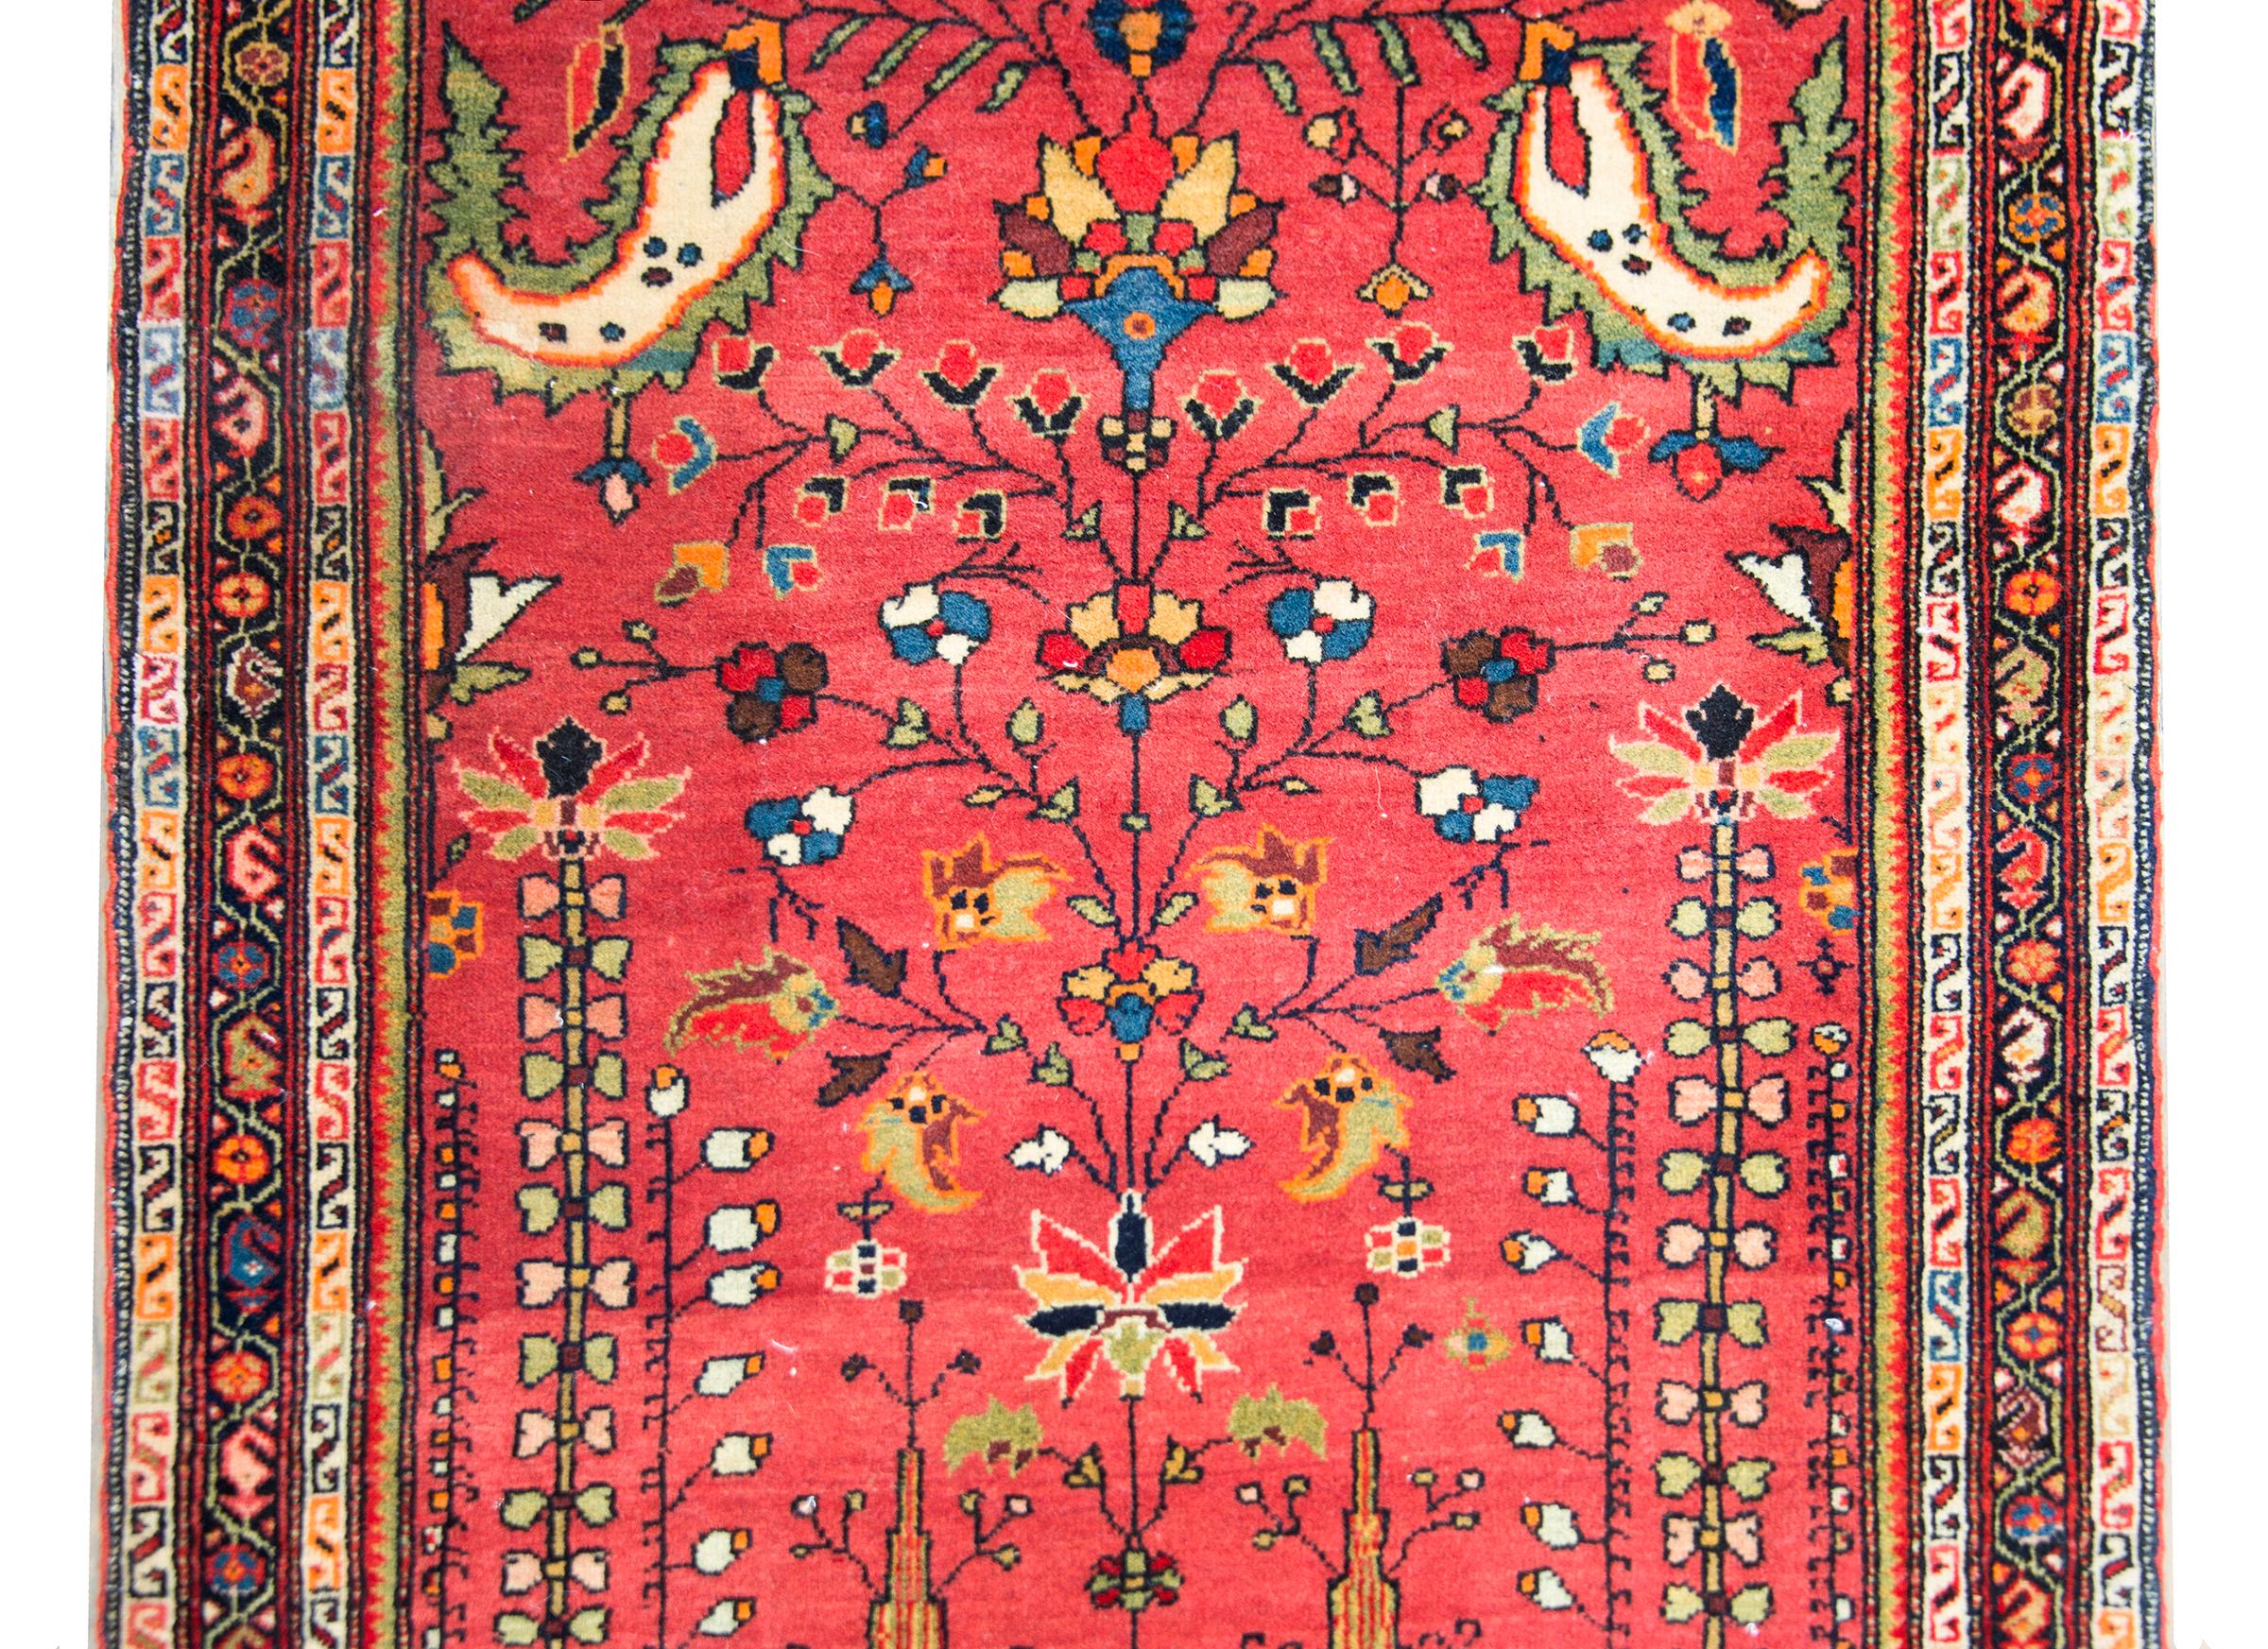 A wonderful early 20th century Persian Sarouk Farahan rug with a traditional central tree-of-life motif flanked by pairs of more flowers and trees, and surrounded by an incredible border composed of several petite scales paisley and floral patterned